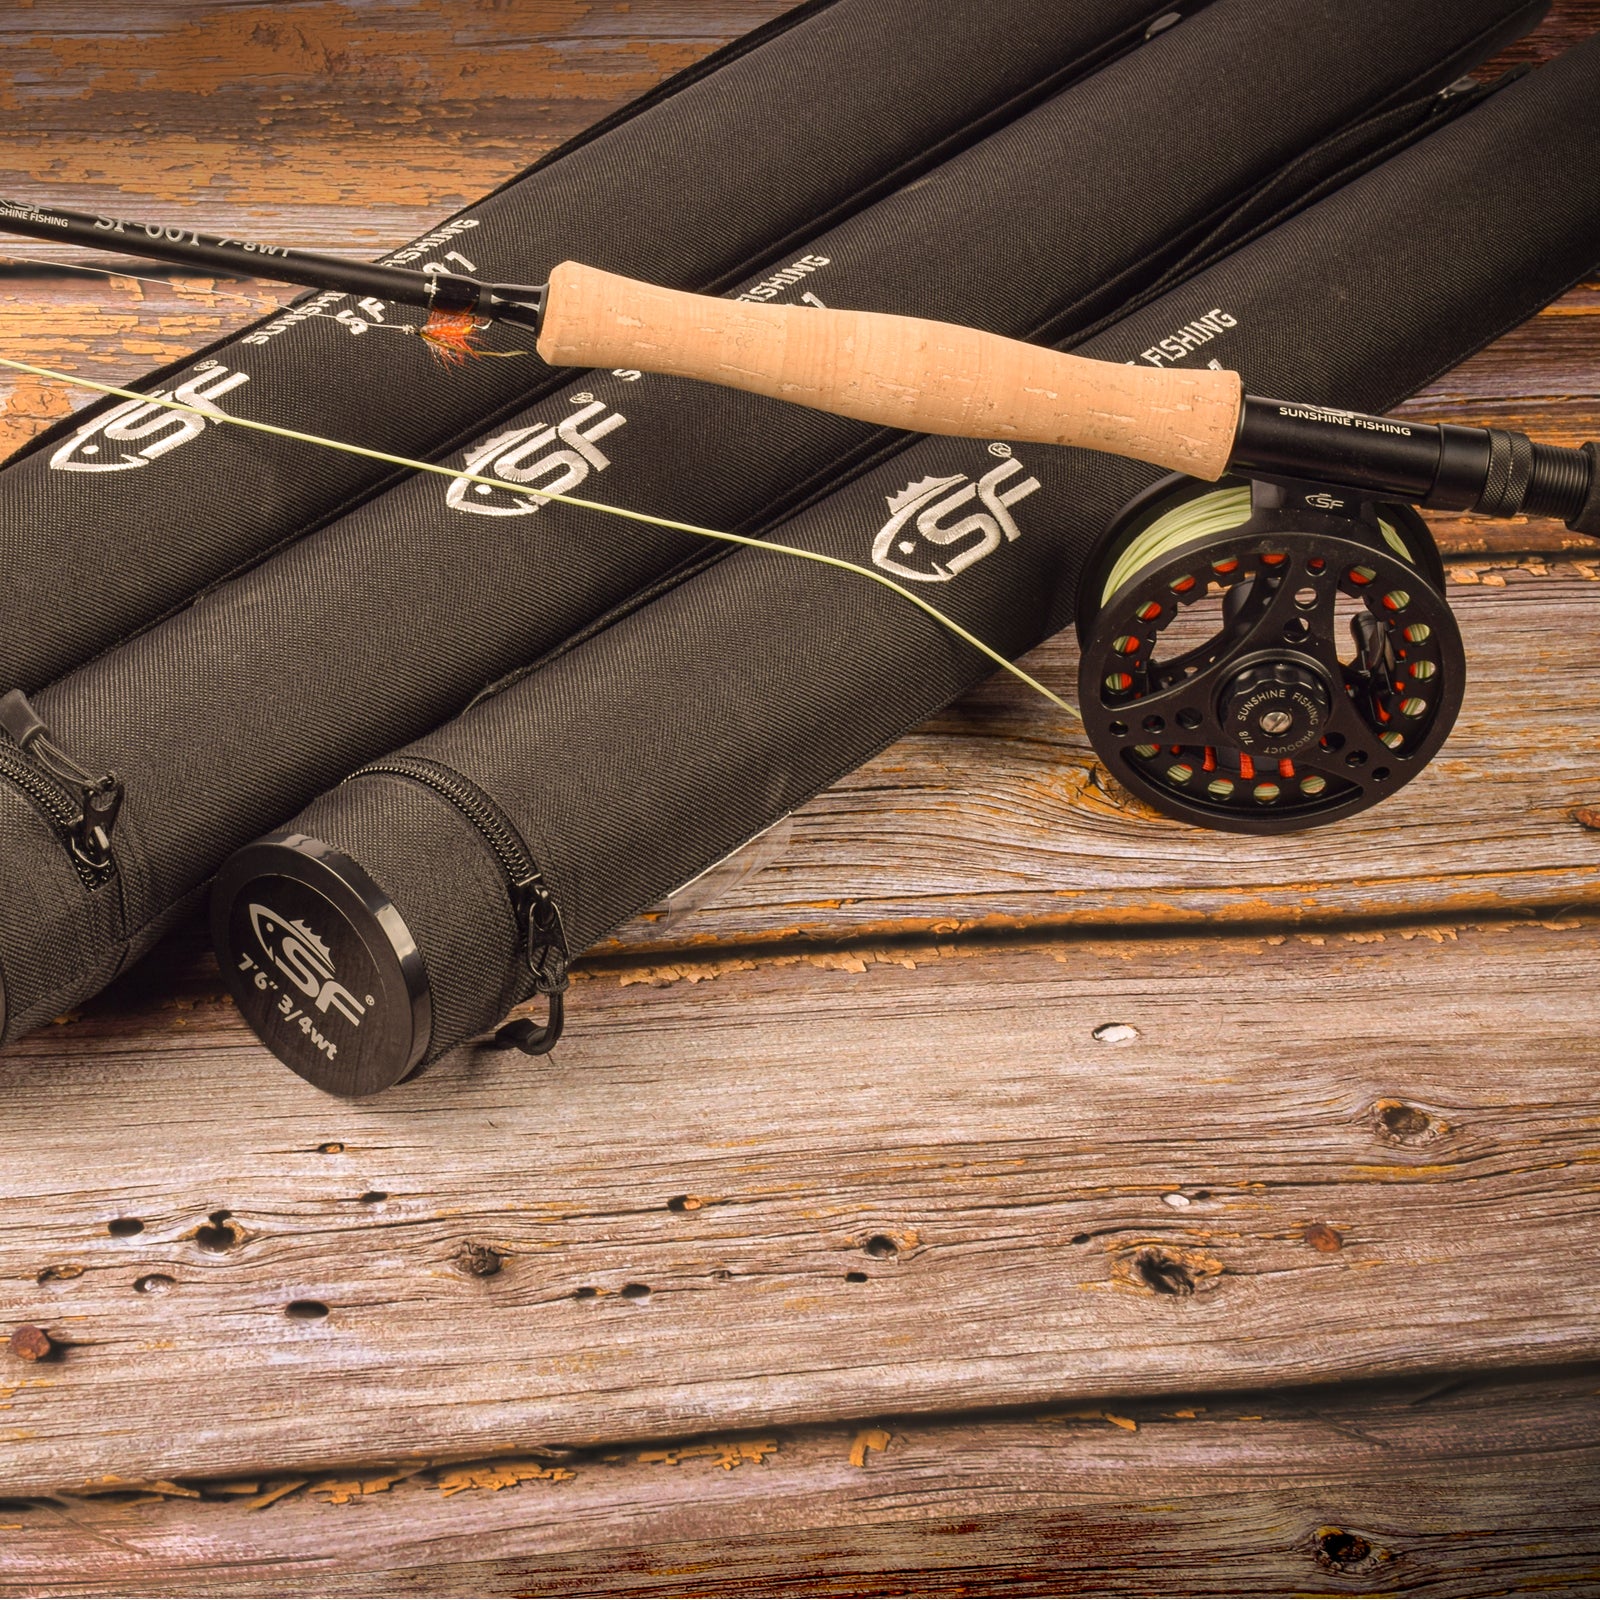  Piscifun Fly Fishing Rod 4 Piece 9ft Graphite - IM7 Carbon  Fiber Blank - Accurate Placement - Ingenious Design - Chromed Guide and  Durable Rod Tube 5wt : Sports & Outdoors